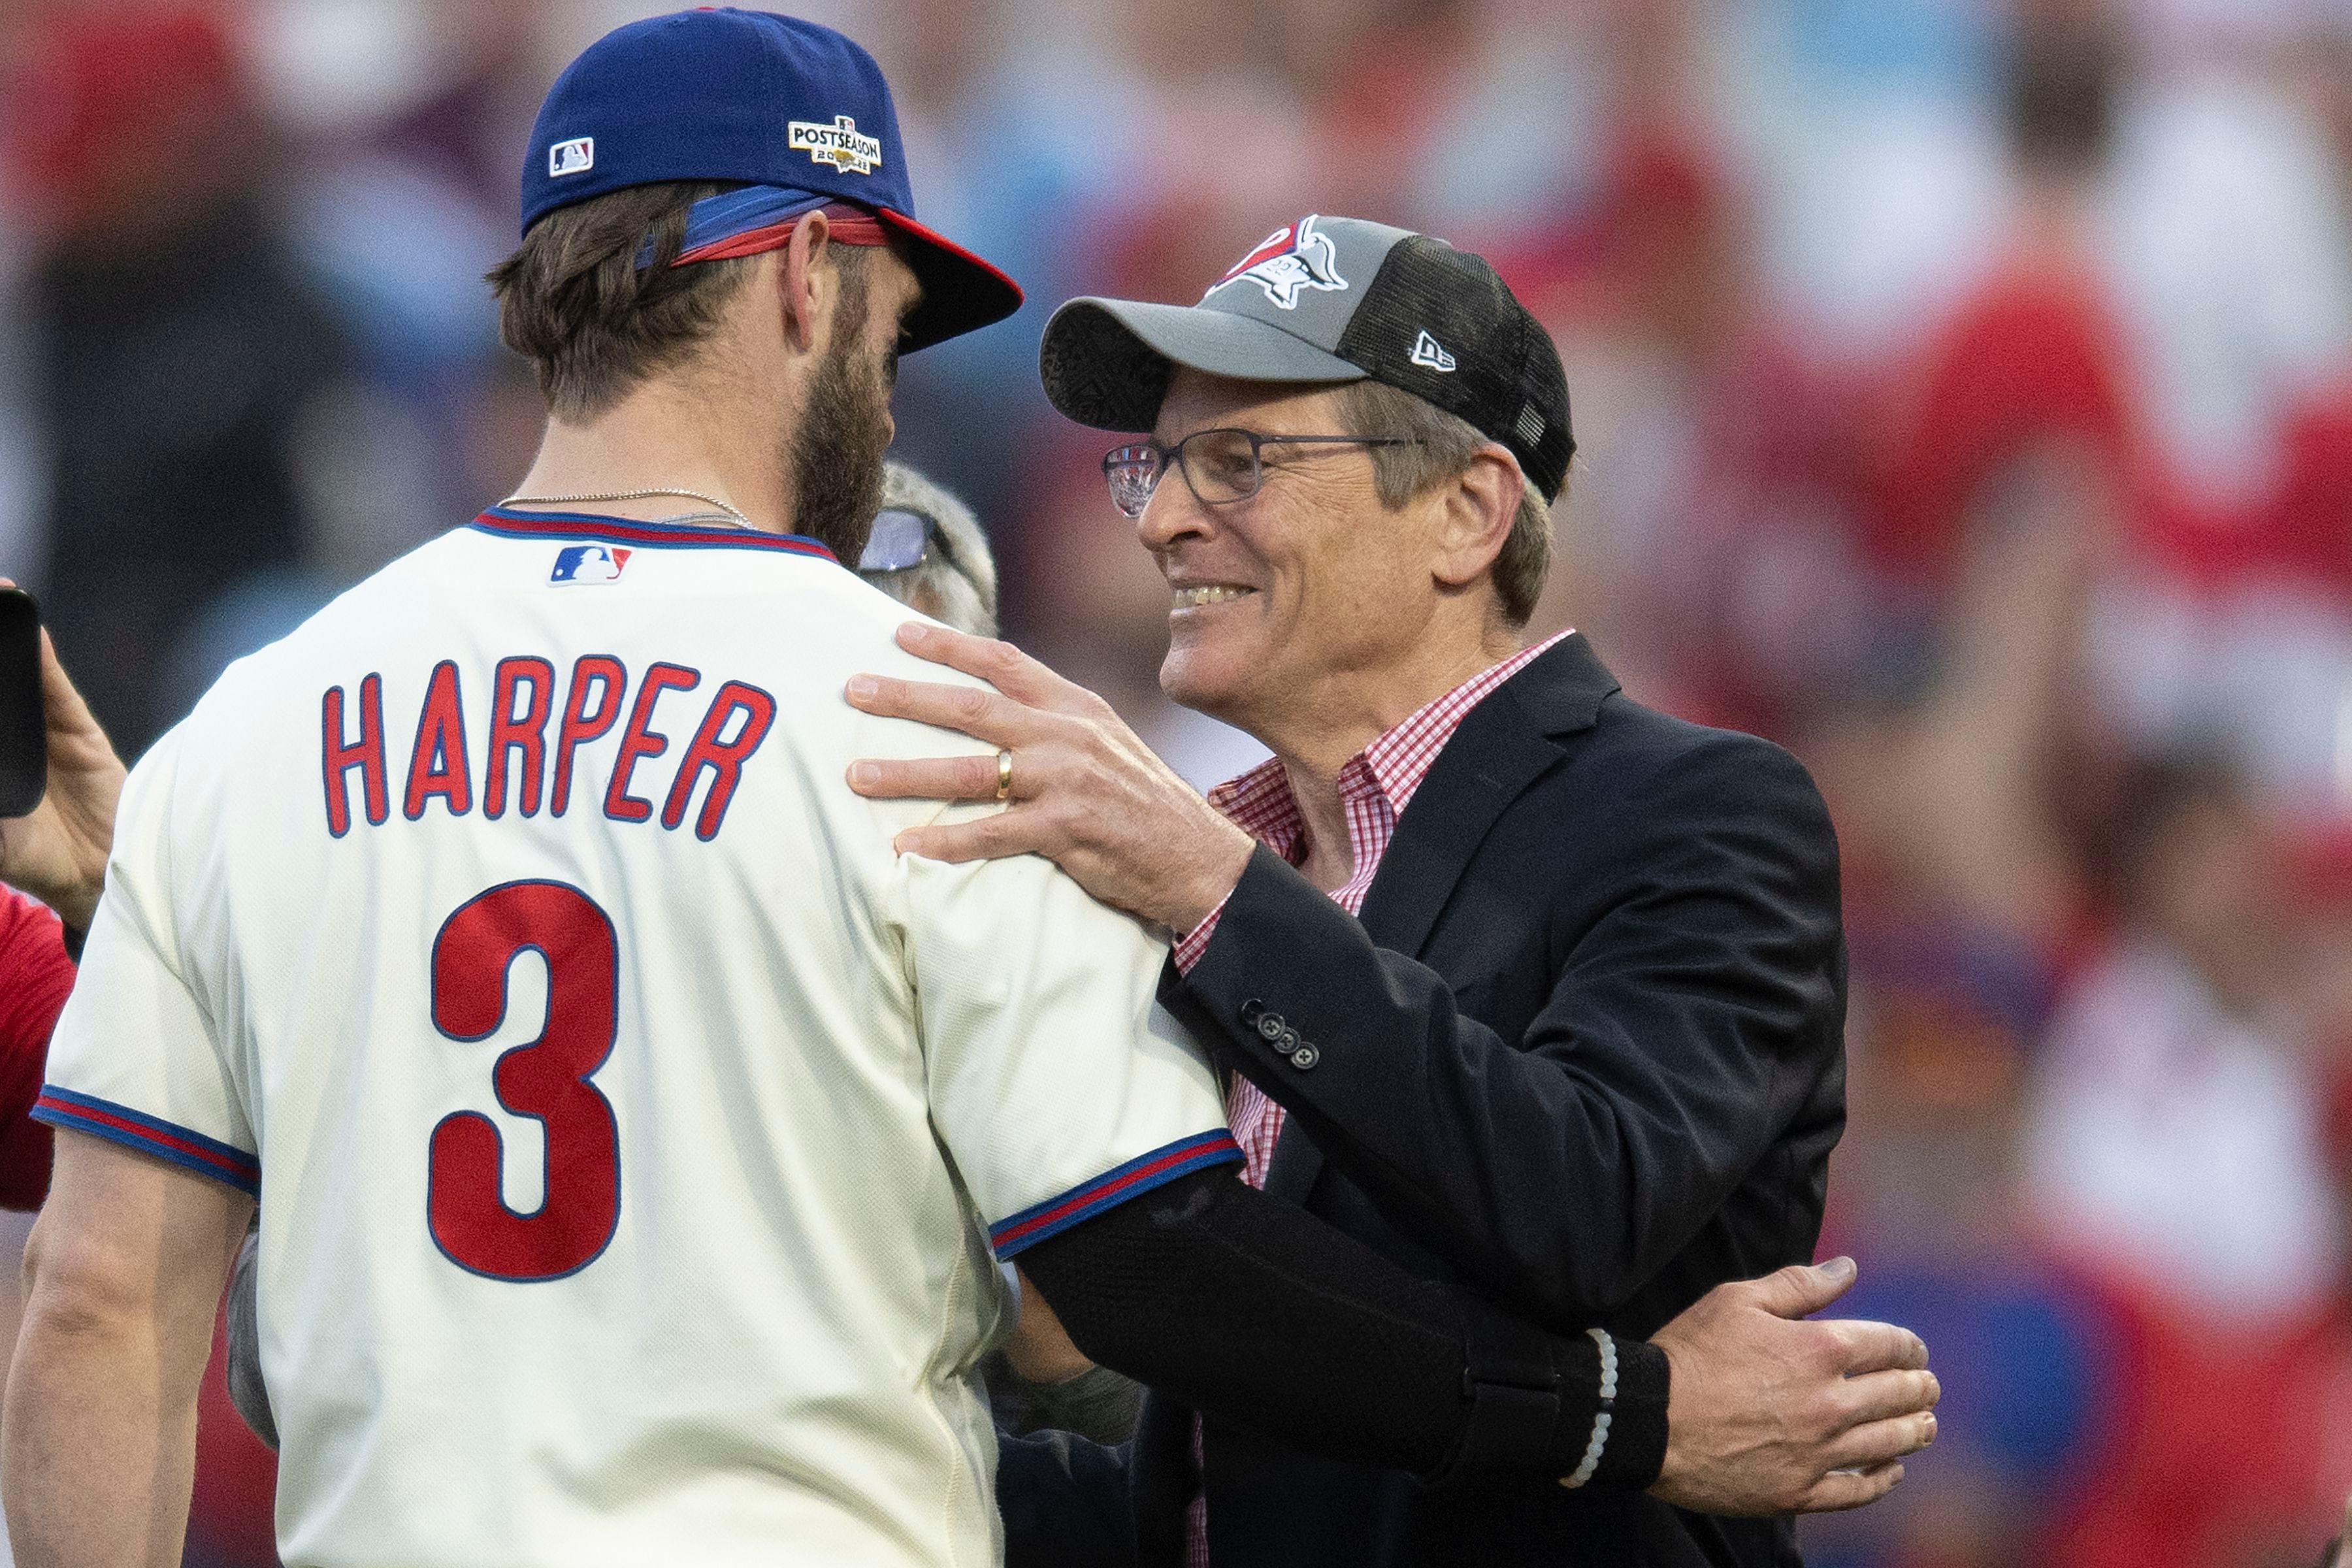 Bryce Harper, $330 million bargain? Sizing up his first five years